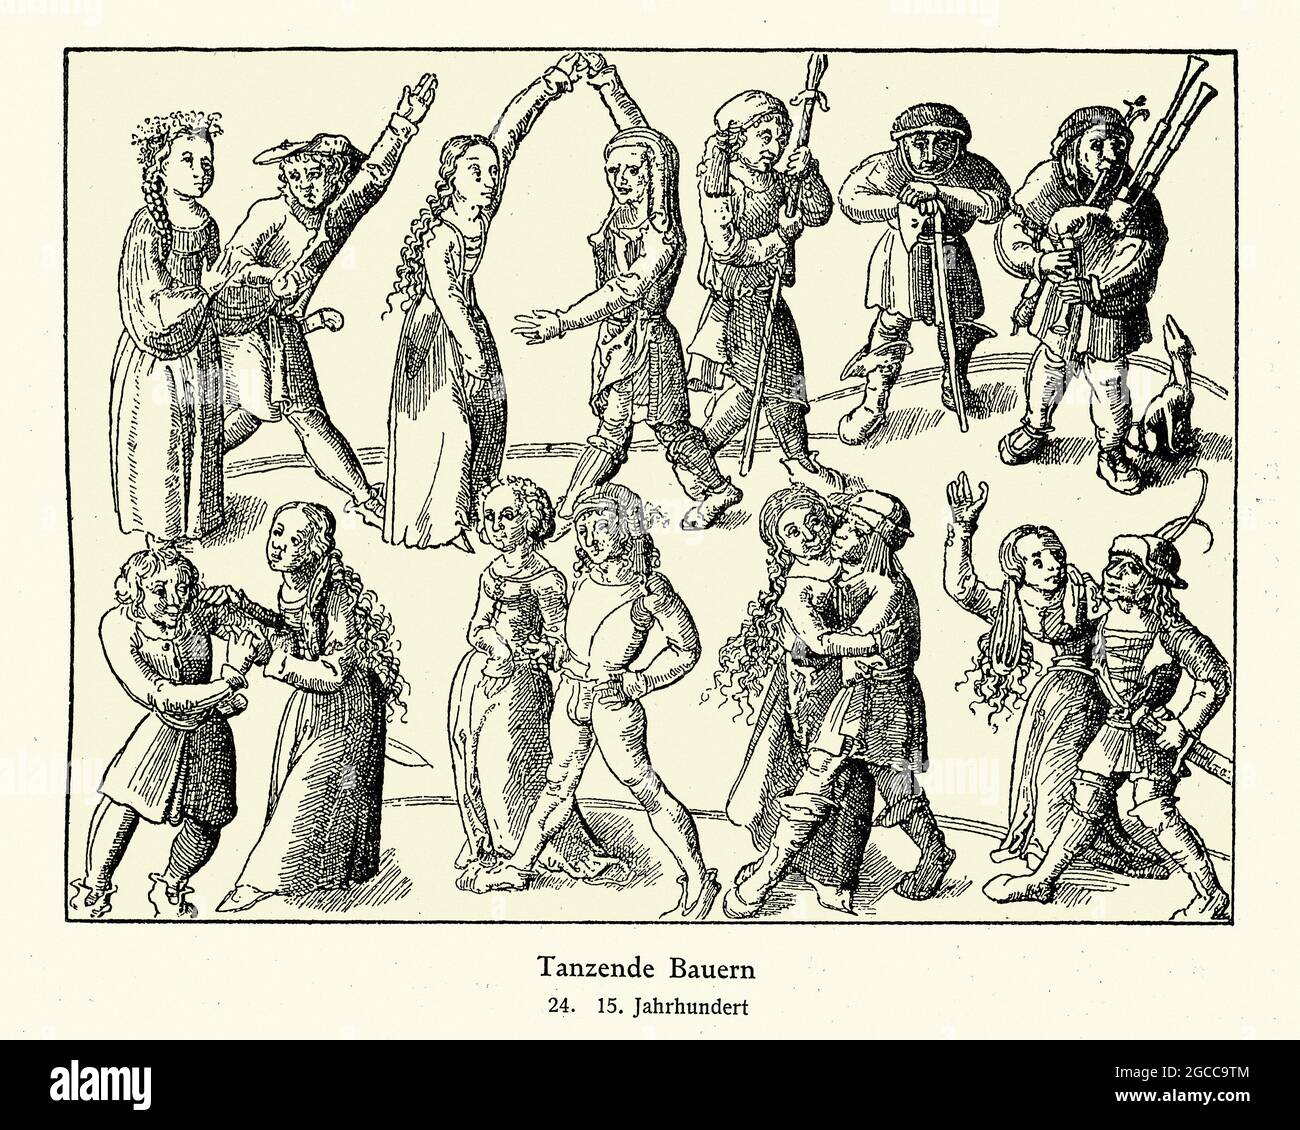 Vintage illustration Dancing peasants, 15th Century Young man and women performing a folk dance, piper playing bagpipe, Warrior with battleaxe watchin Stock Photo